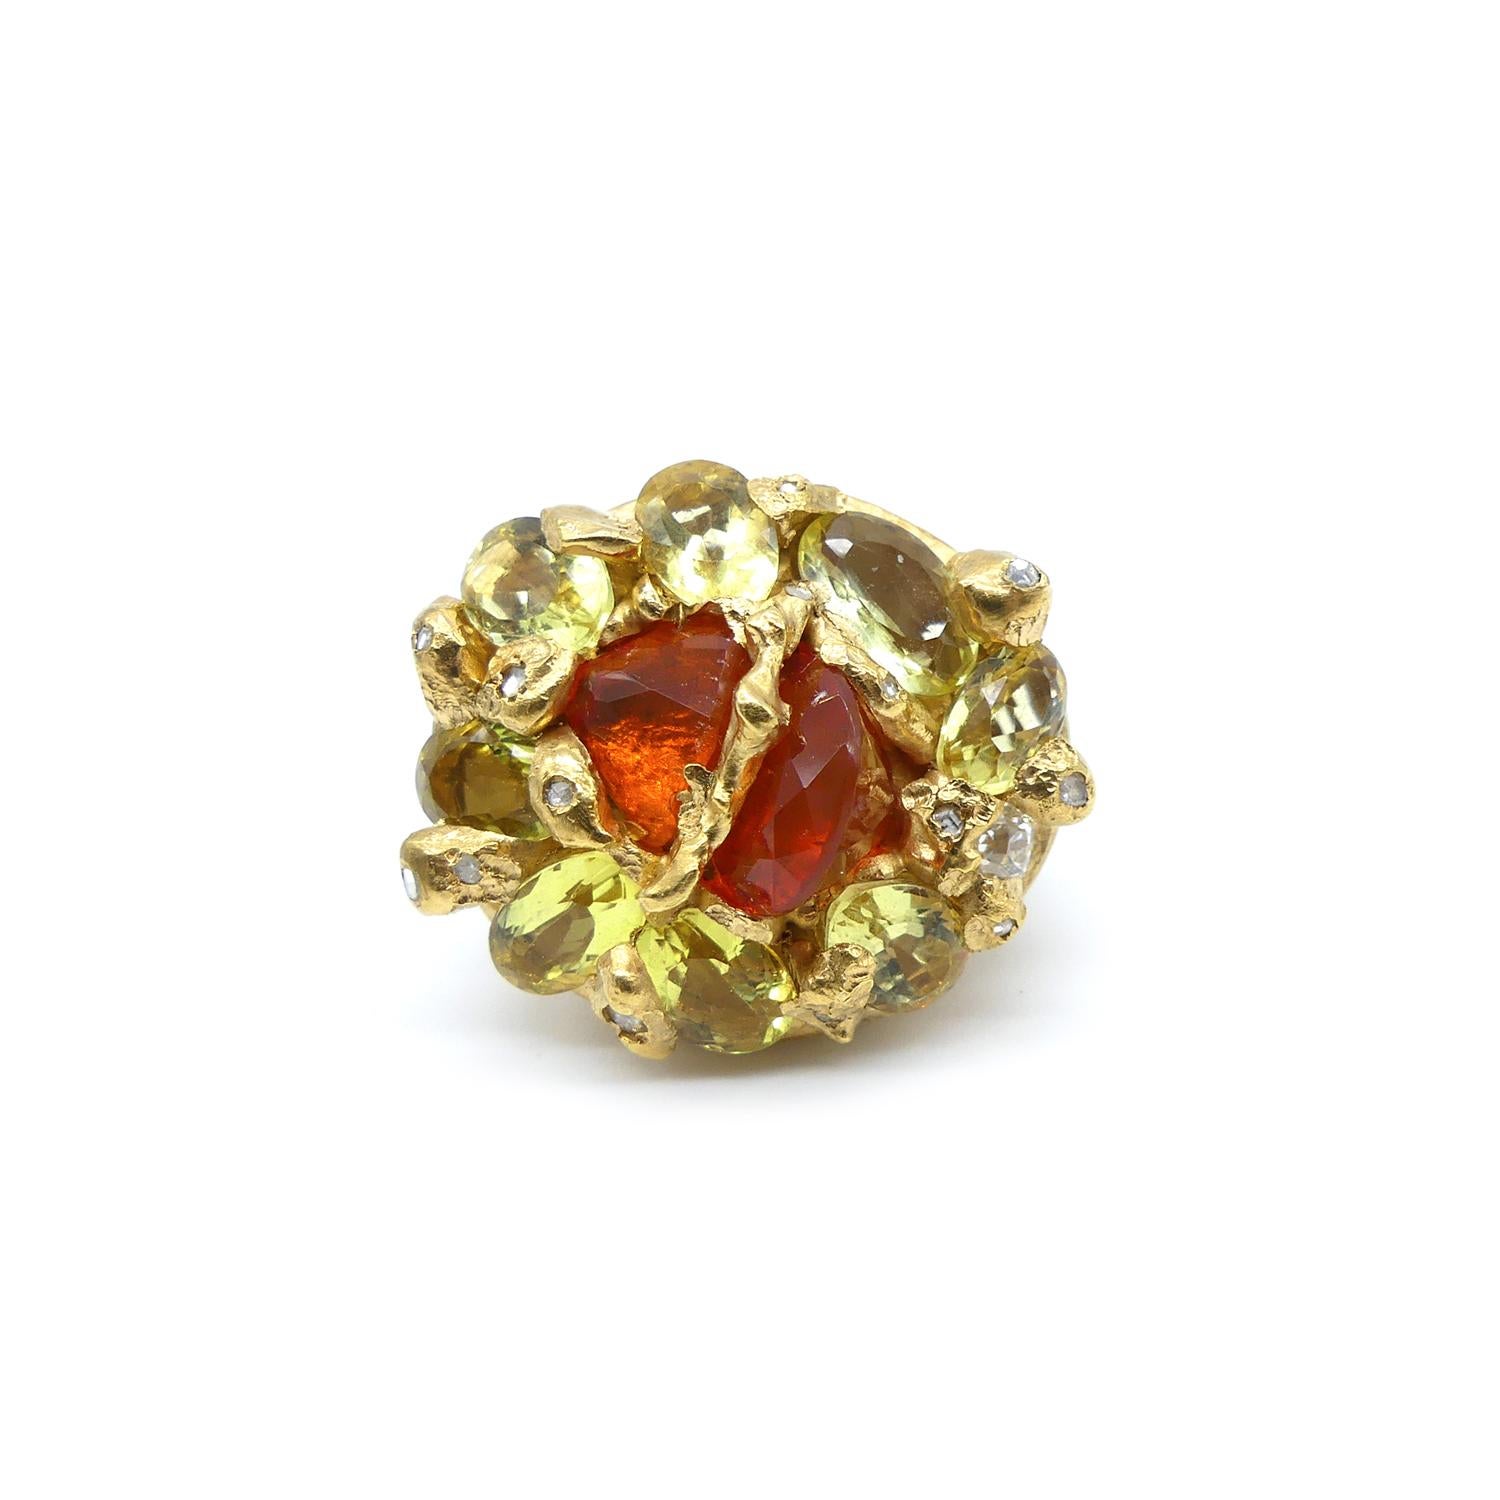 Fire Opal Citrines Diamonds Gold Plated Cocktail Ring

Fire Opal divided in two with 0'32 Carat Diamonds in a Gold Plated Cocktail Ring.

This ring is from the Collection 